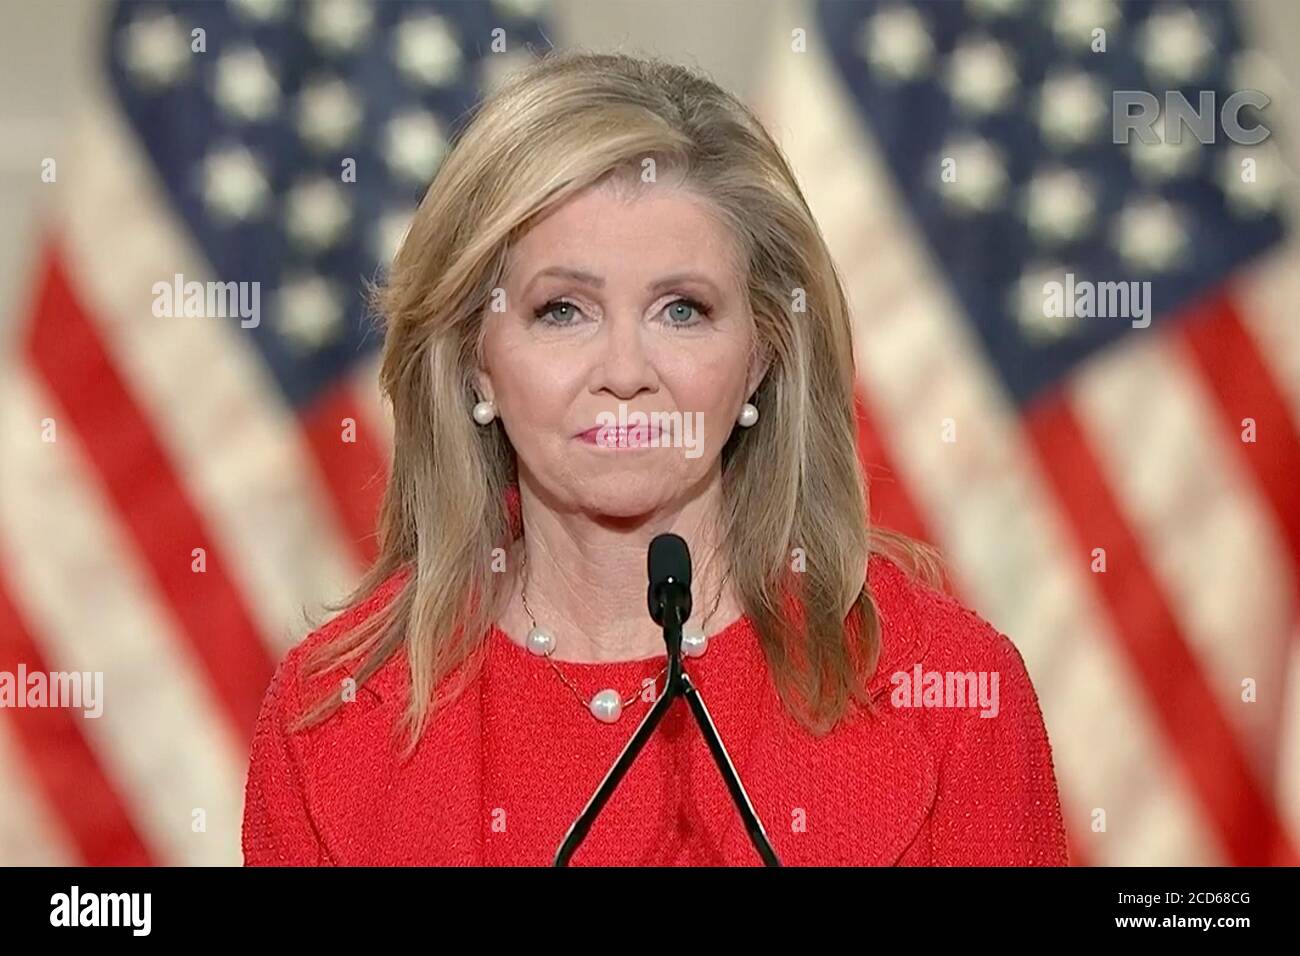 Washington, United States. 26th Aug, 2020. Senator Marsha Blackburn of Tennessee addresses the third night of the 2020 Republican National Convention on August 26, 2020, in Washington, DC. The novel coronavirus pandemic has forced the Republican Party to move away from an in-person convention to a televised format. Credit: UPI/Alamy Live News Stock Photo